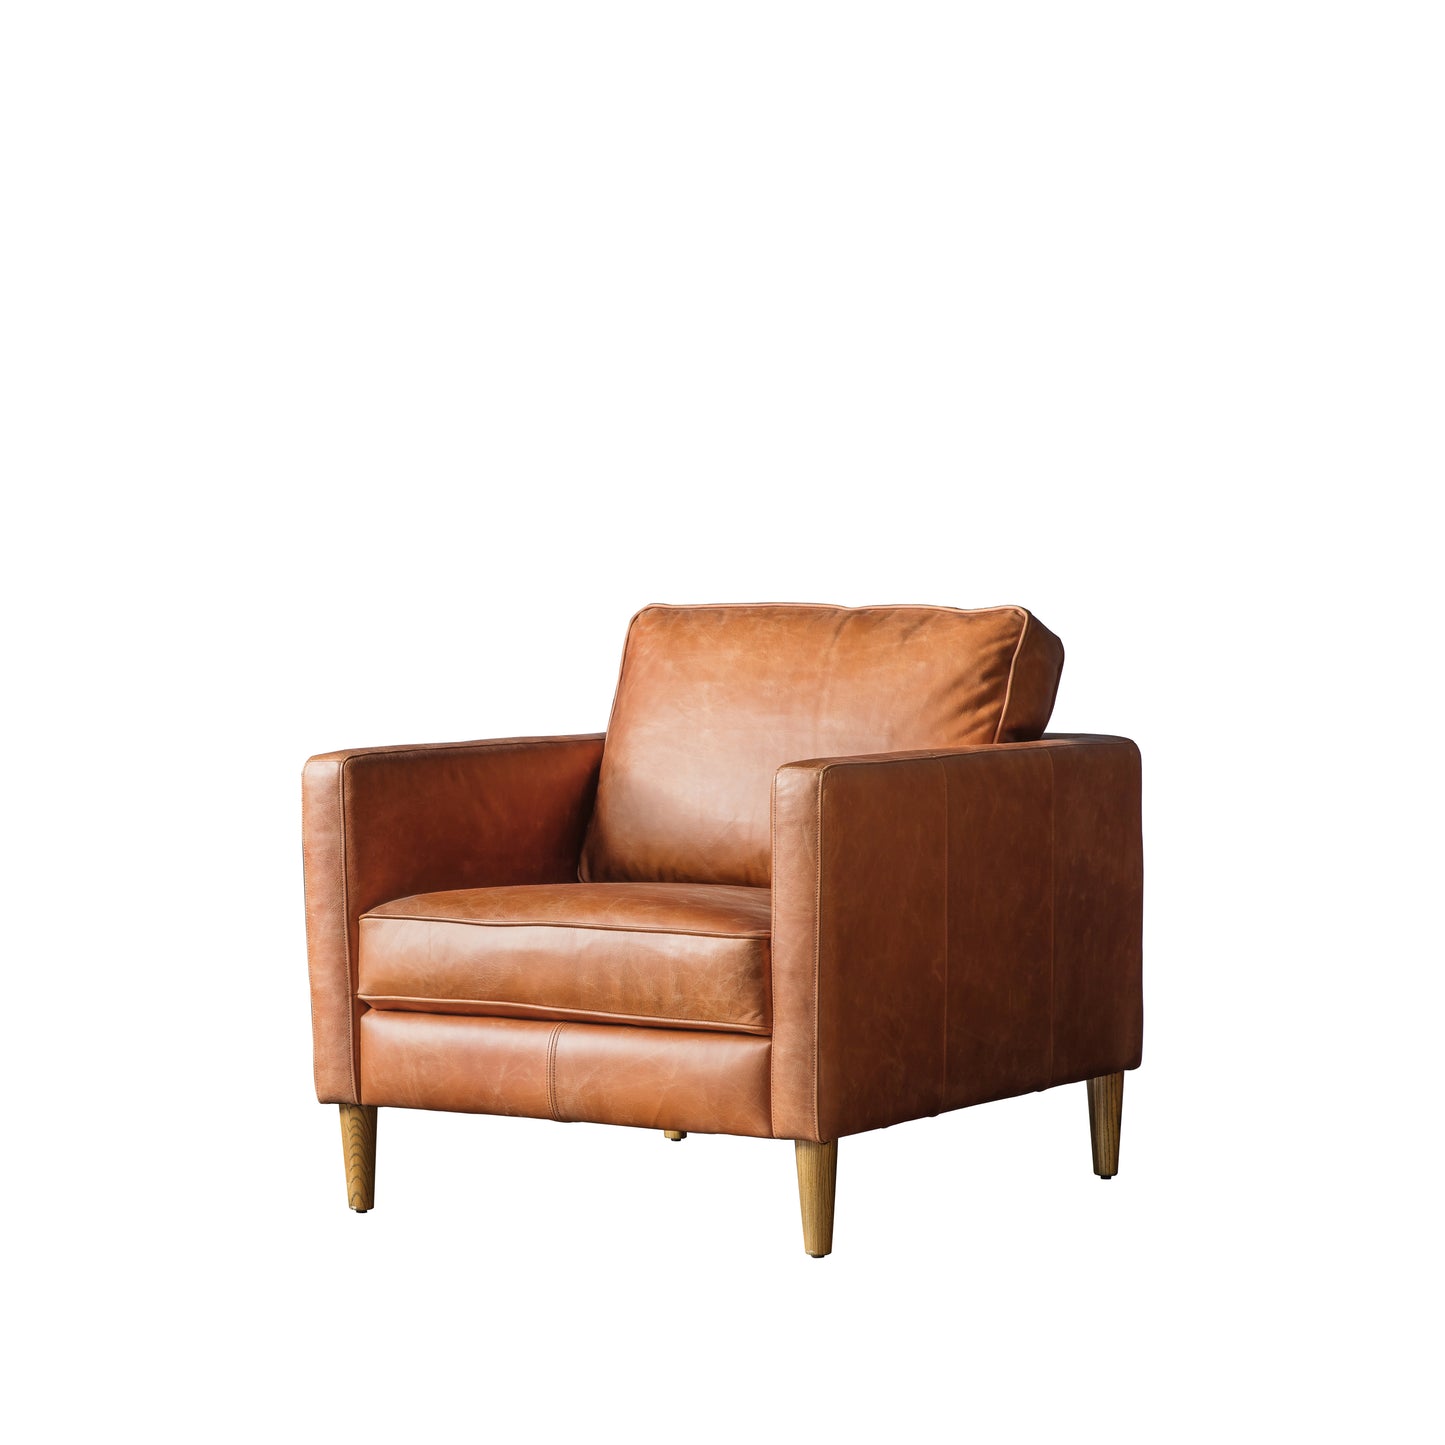 An Osborne Armchair Vintage Brown Leather for interior decor from Kikiathome.co.uk.